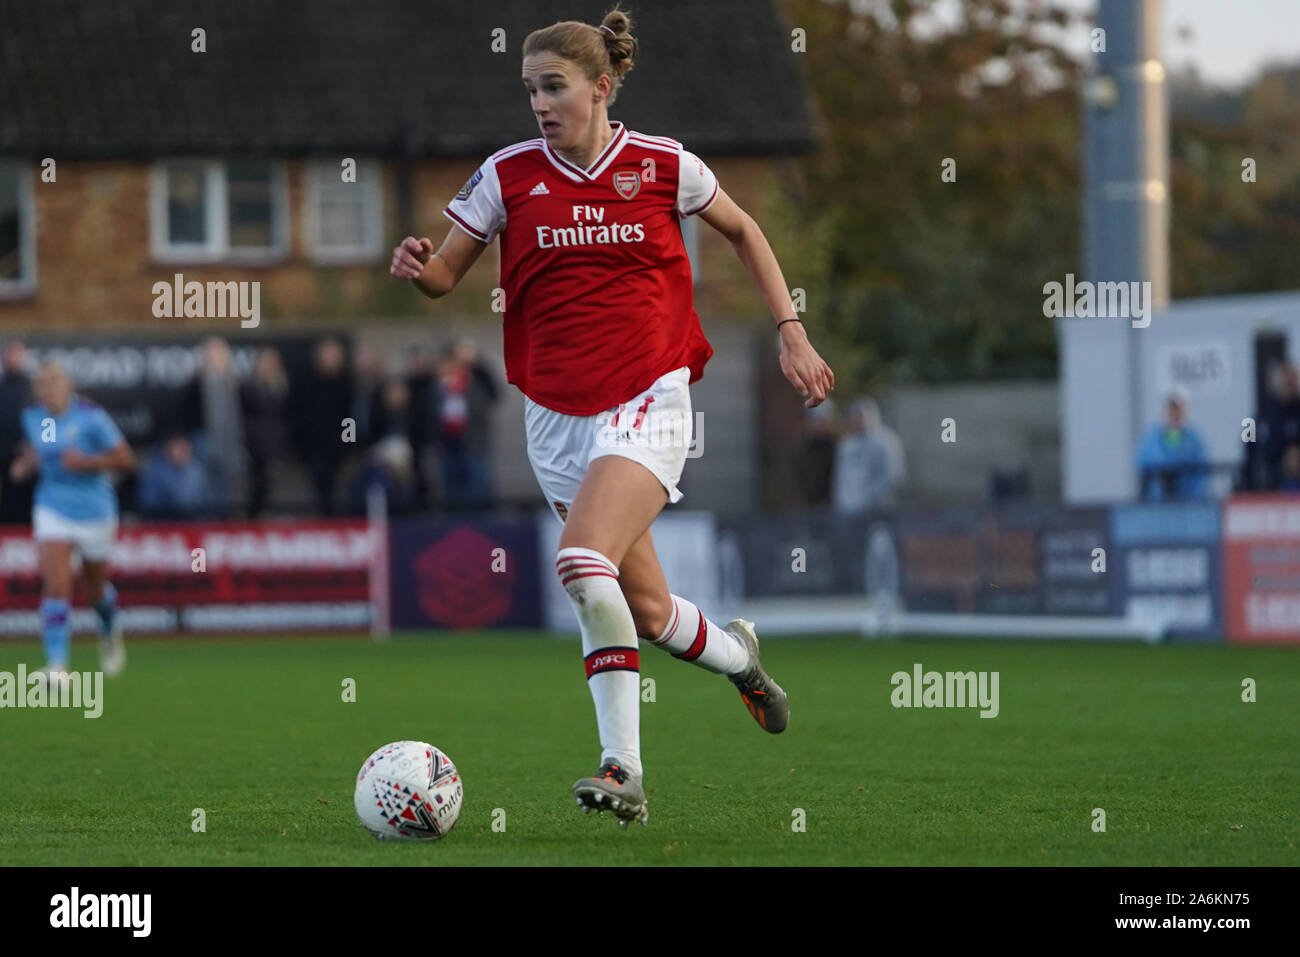 Borehamwood, UK. 27th Oct, 2019. Vivianne Miedema of Arsenal goes forward with the ball during the Barclay's FA WSL football match between Arsenal vs Manchester City at Meadow Park on October 27, 2019 in Borehamwood, England (Photo by Daniela Porcelli/SPP) Credit: SPP Sport Press Photo. /Alamy Live News Stock Photo